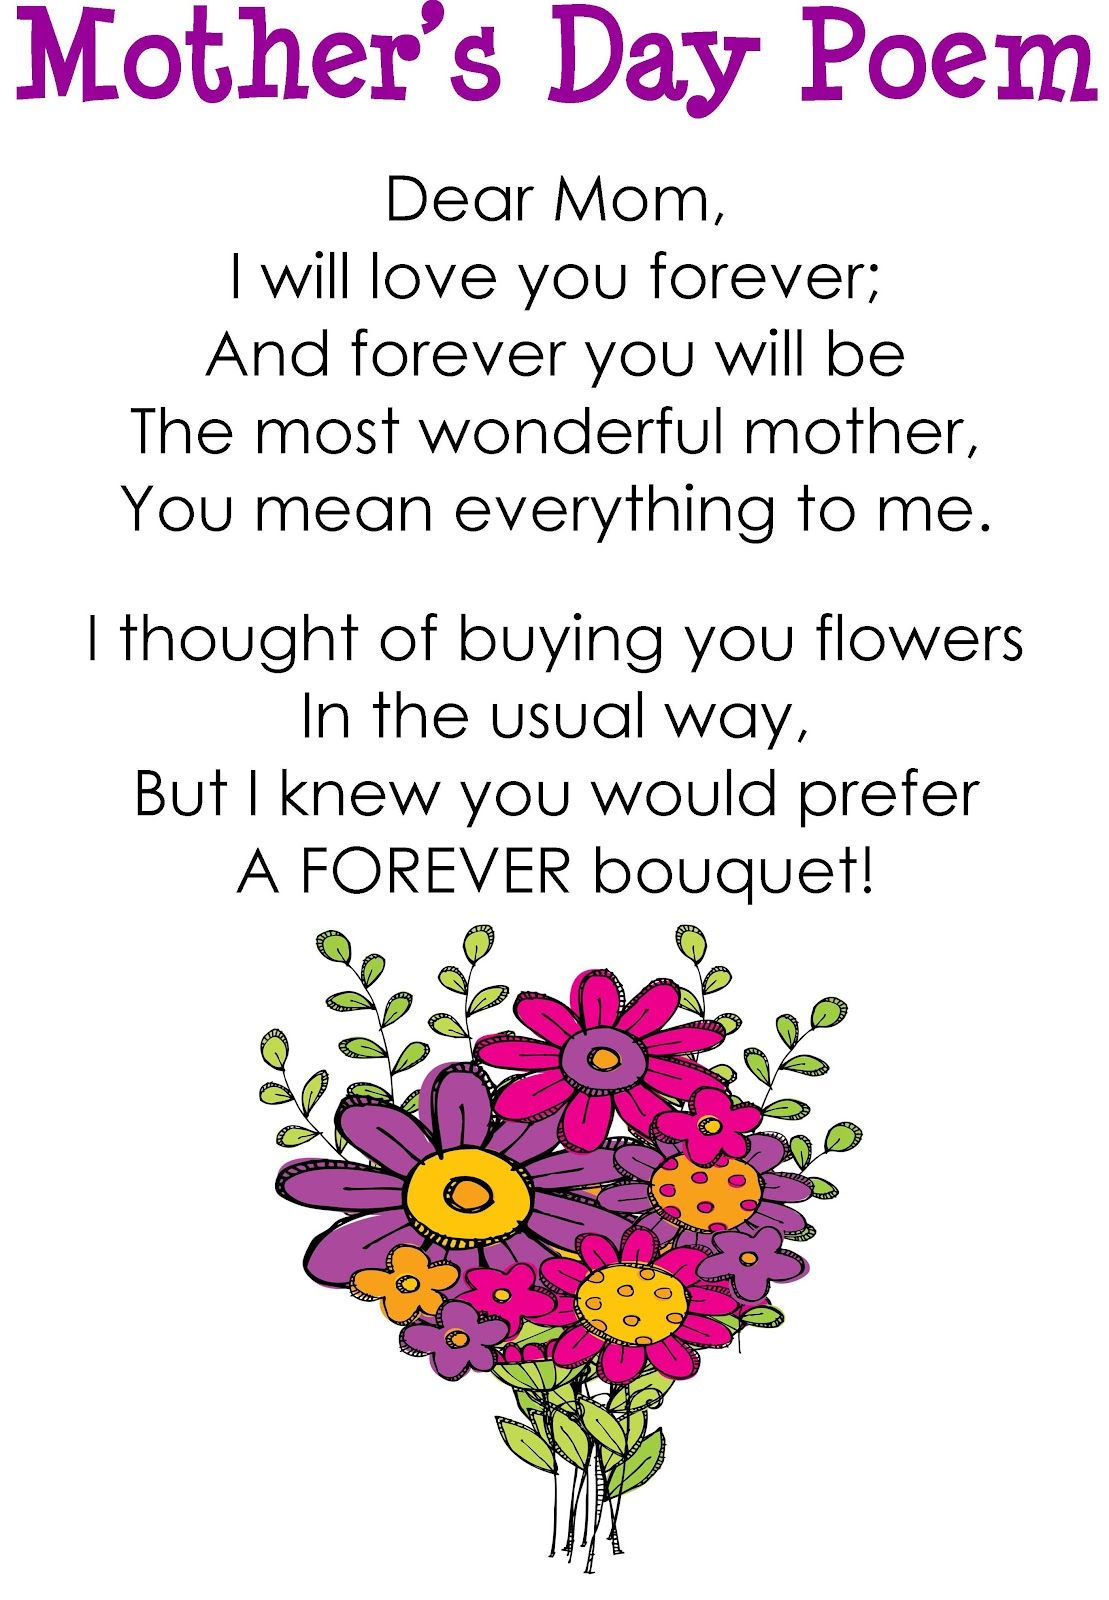 Mothers Day Poem Picture Image